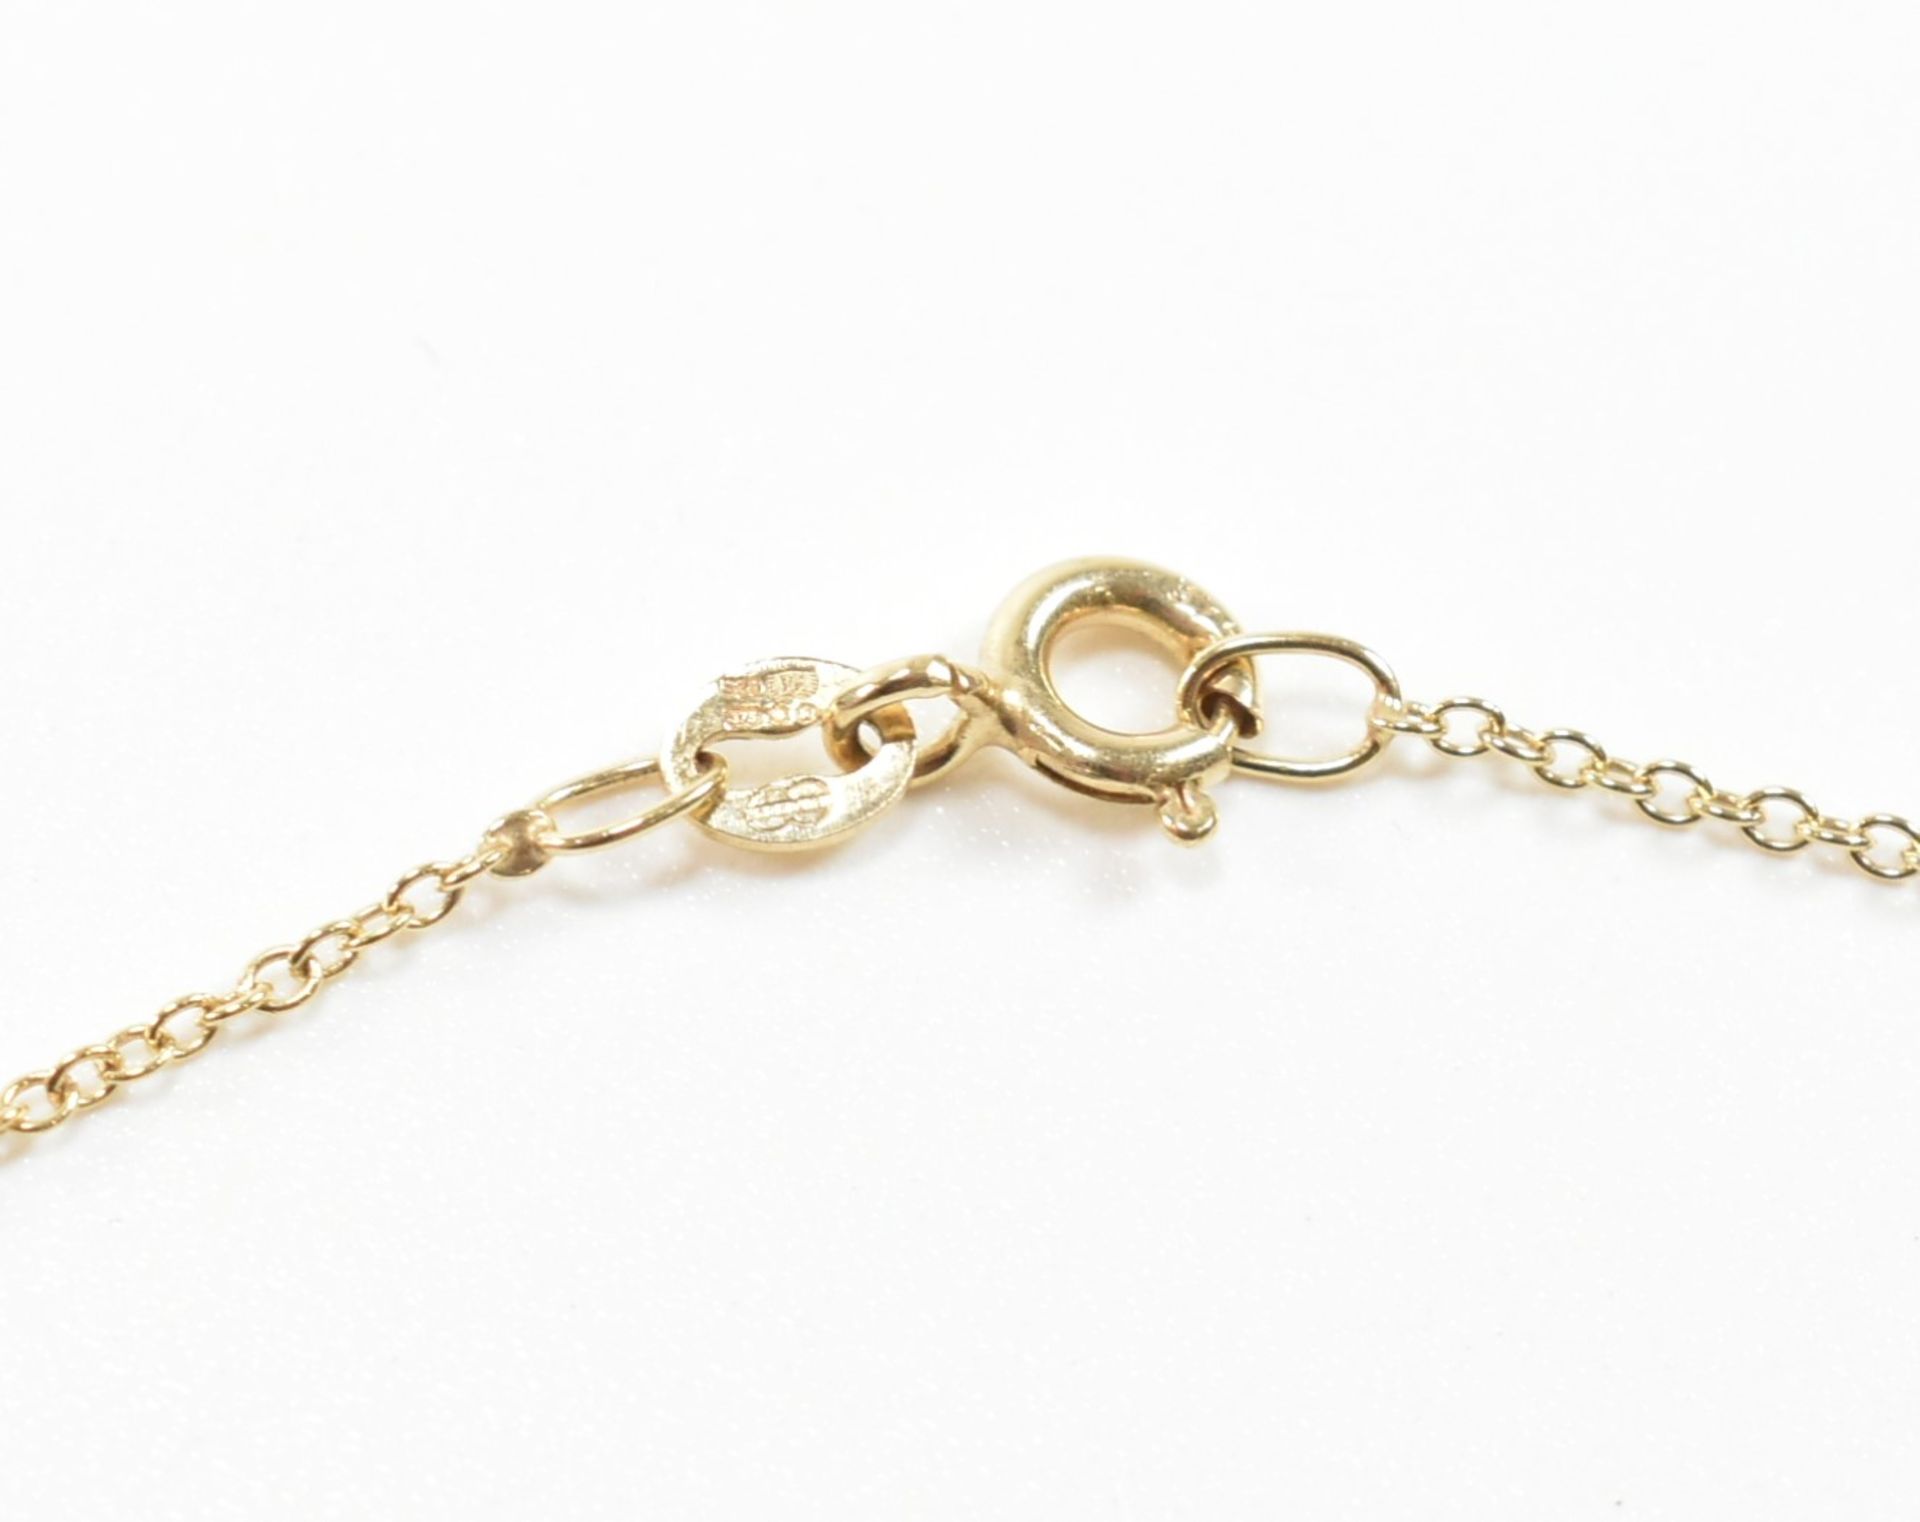 HALLMARKED 9CT GOLD NECKLACE CHAIN & PENDANT - Image 5 of 6